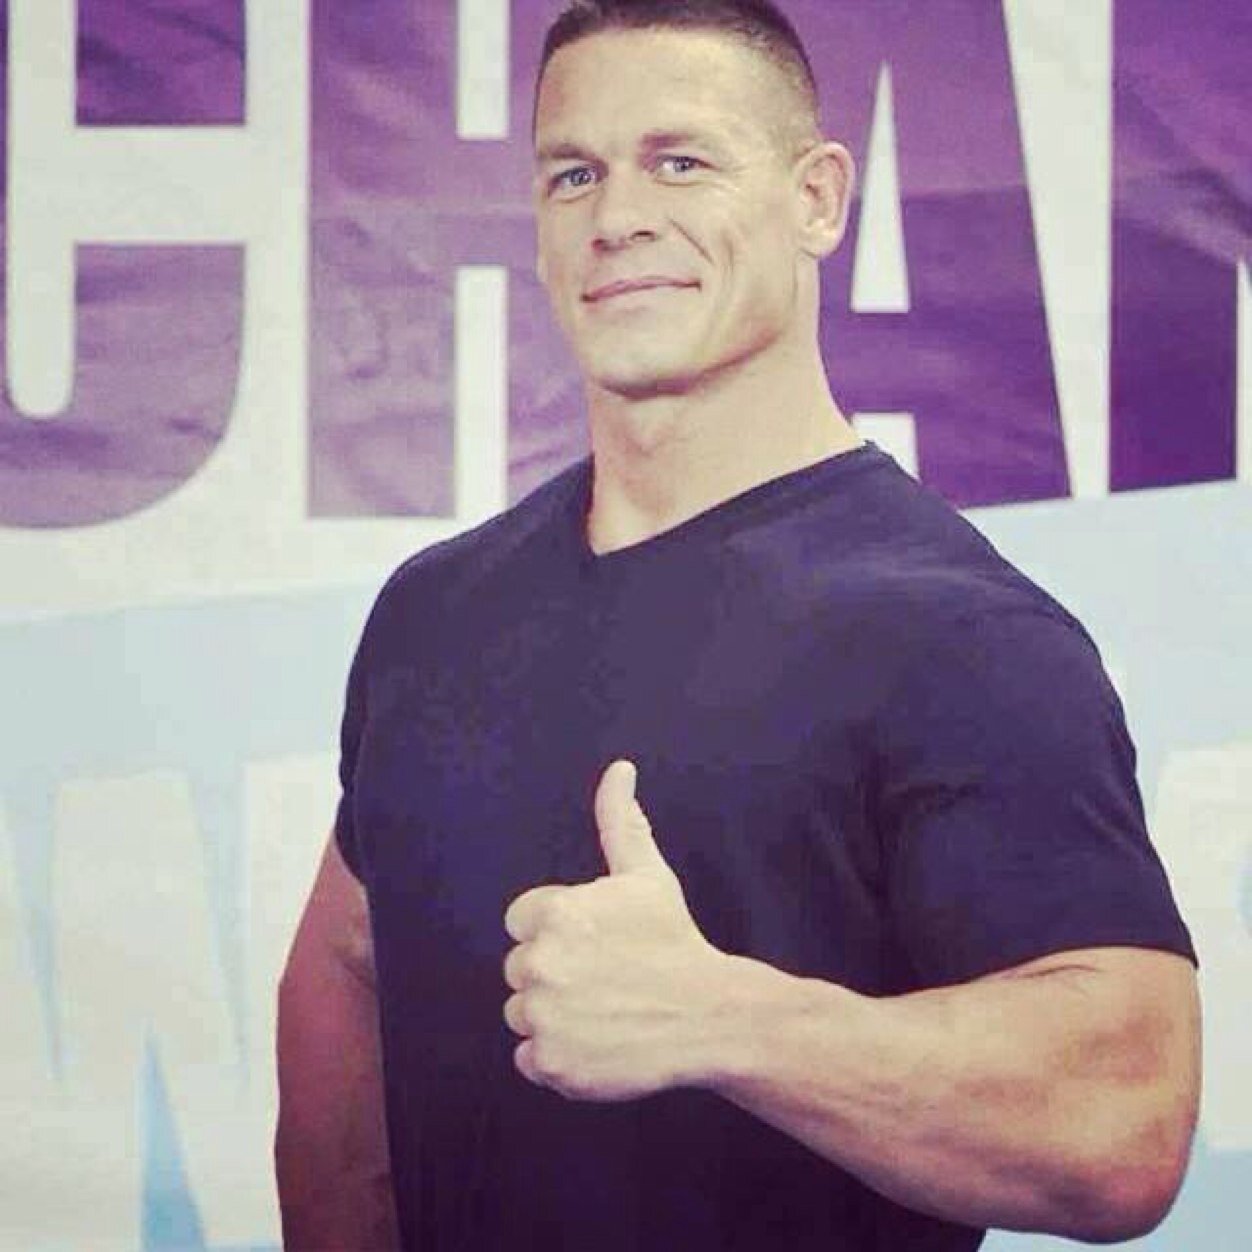 Bio melted due to Cena's hotness☀